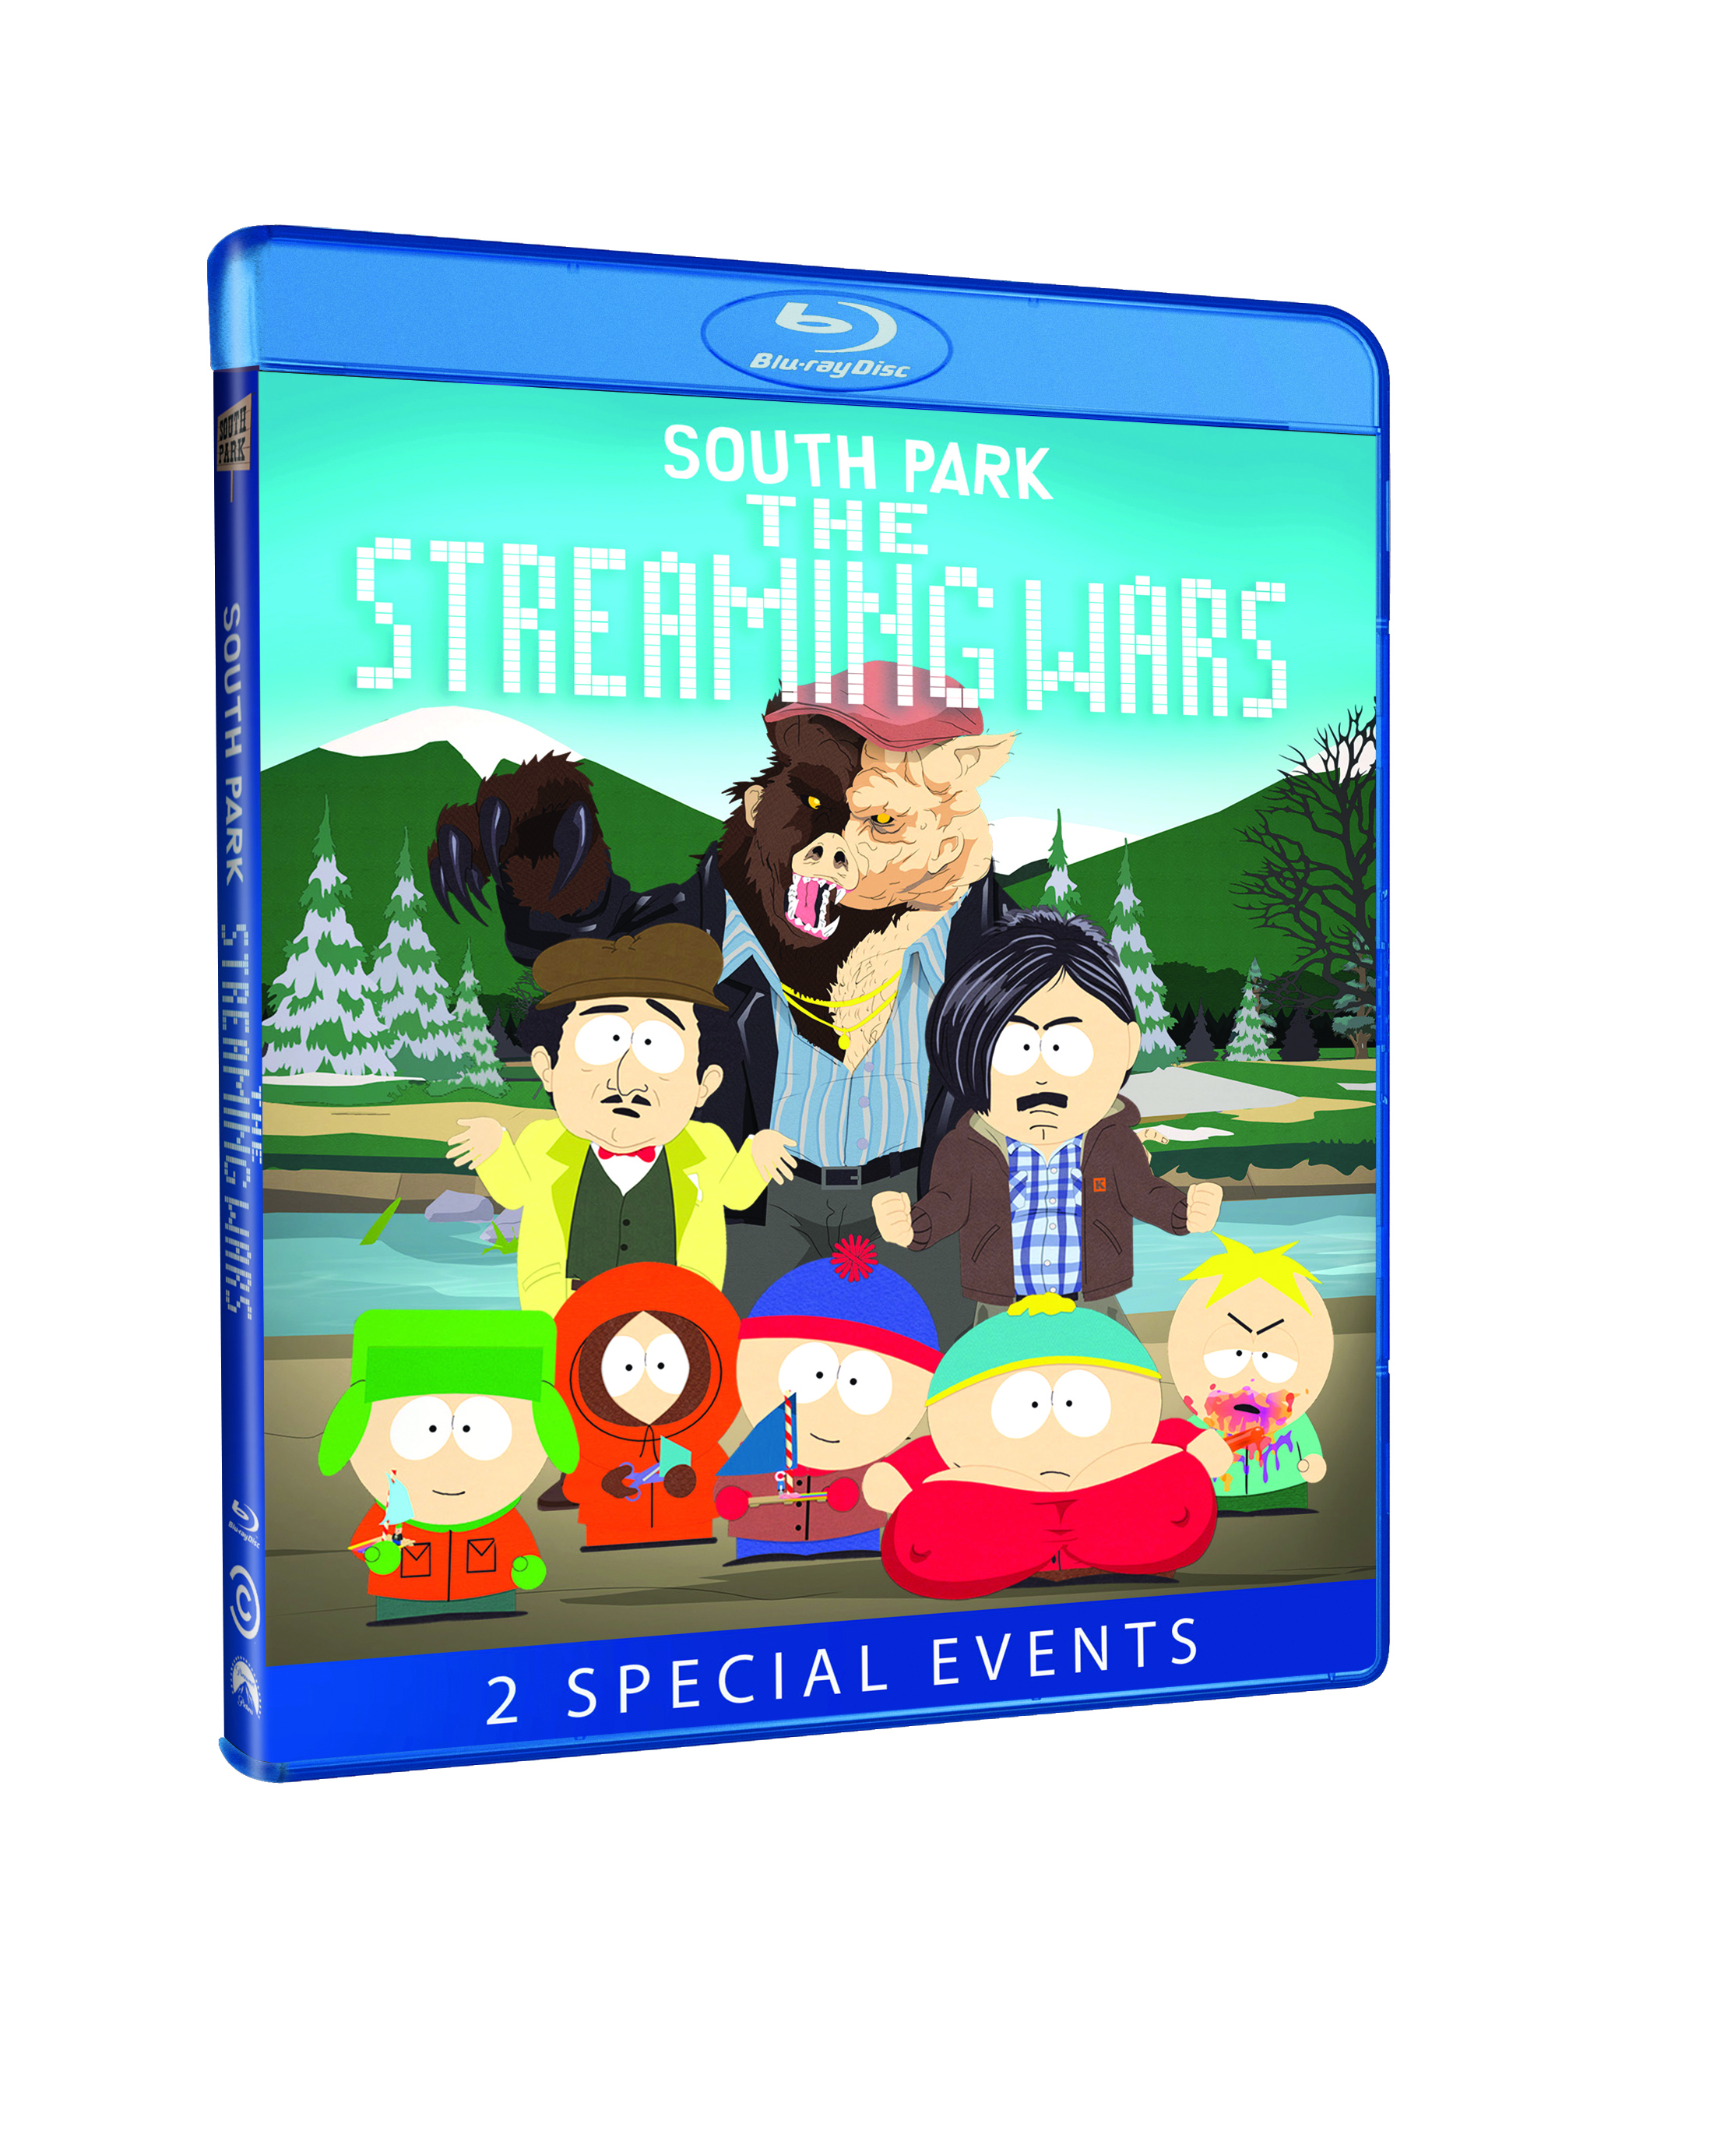 South Park: The Streaming Wars Blu-Ray cover (Paramount Home Entertainment)